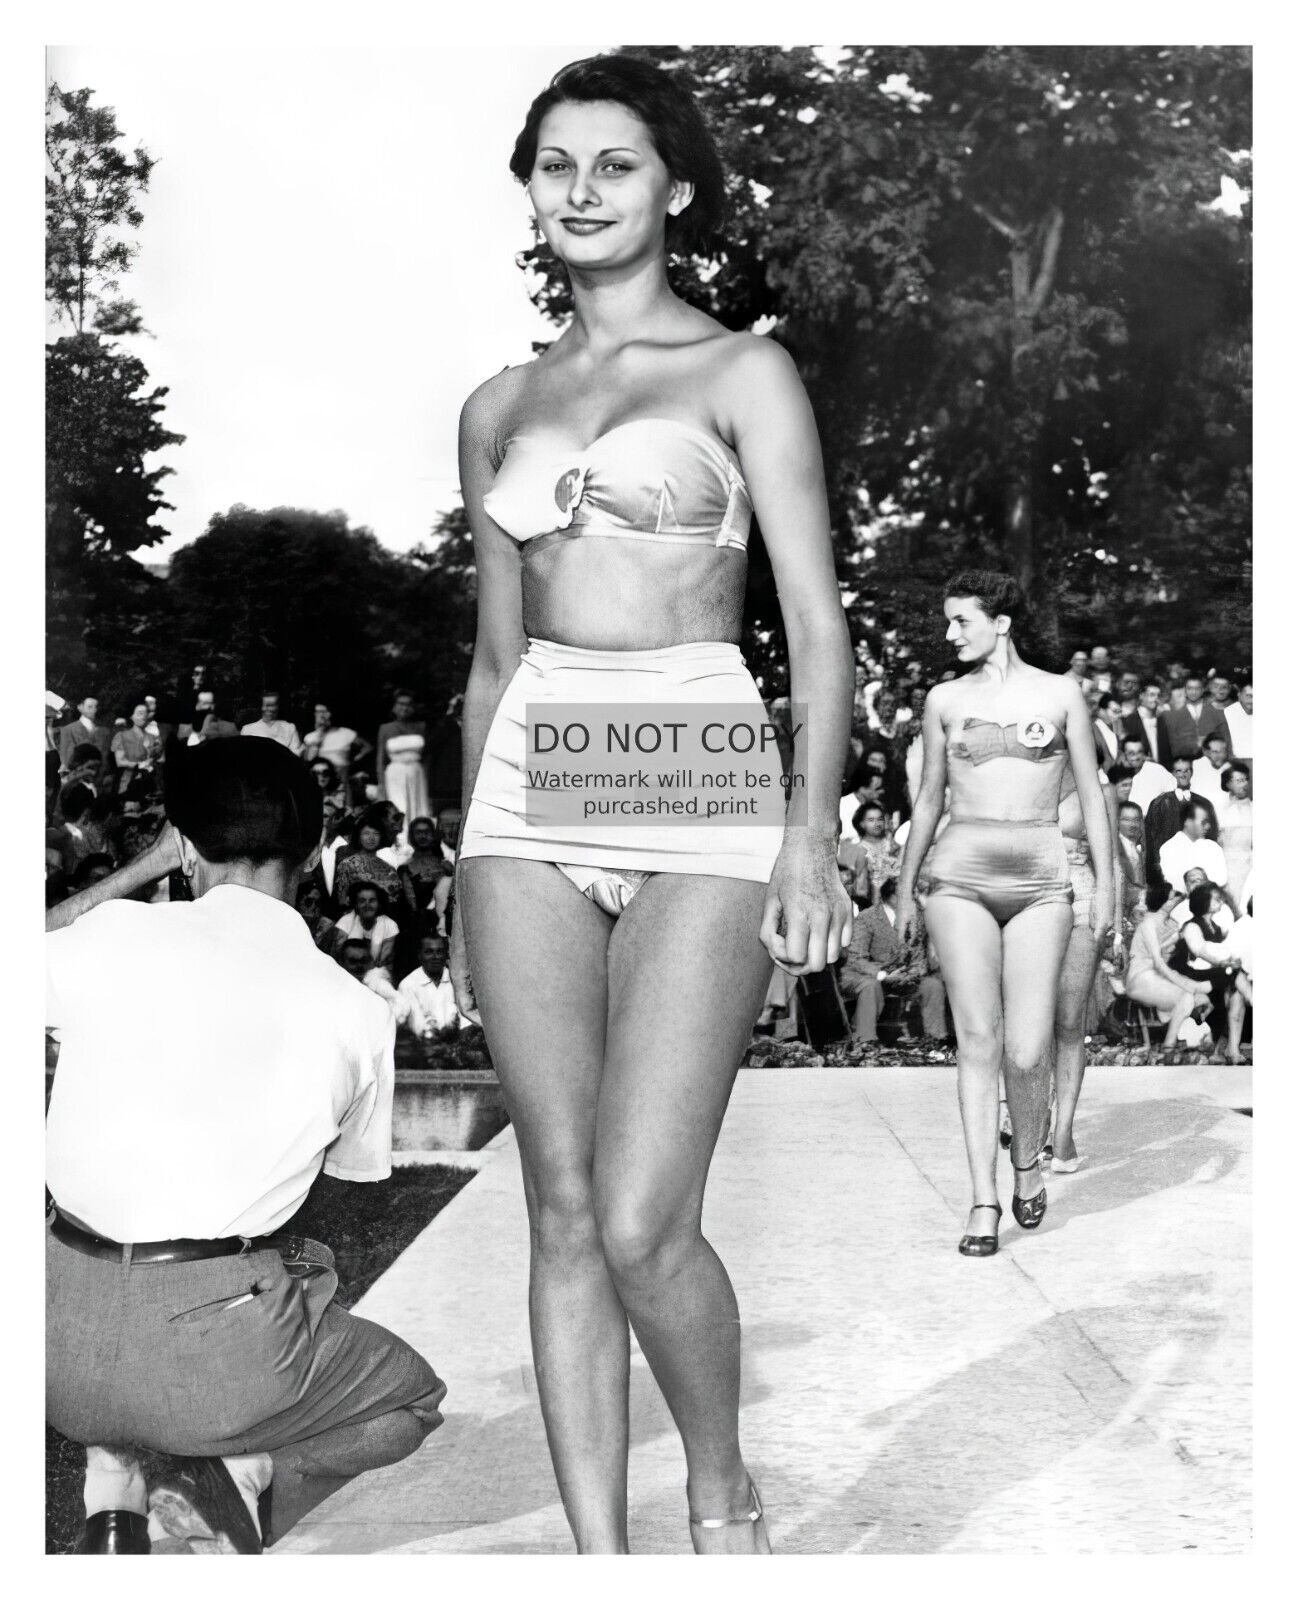 YOUNG SOPHIA LOREN AT BEAUTY CONTEST IN NAPLES FRANCE 1949 8X10 B&W PHOTO